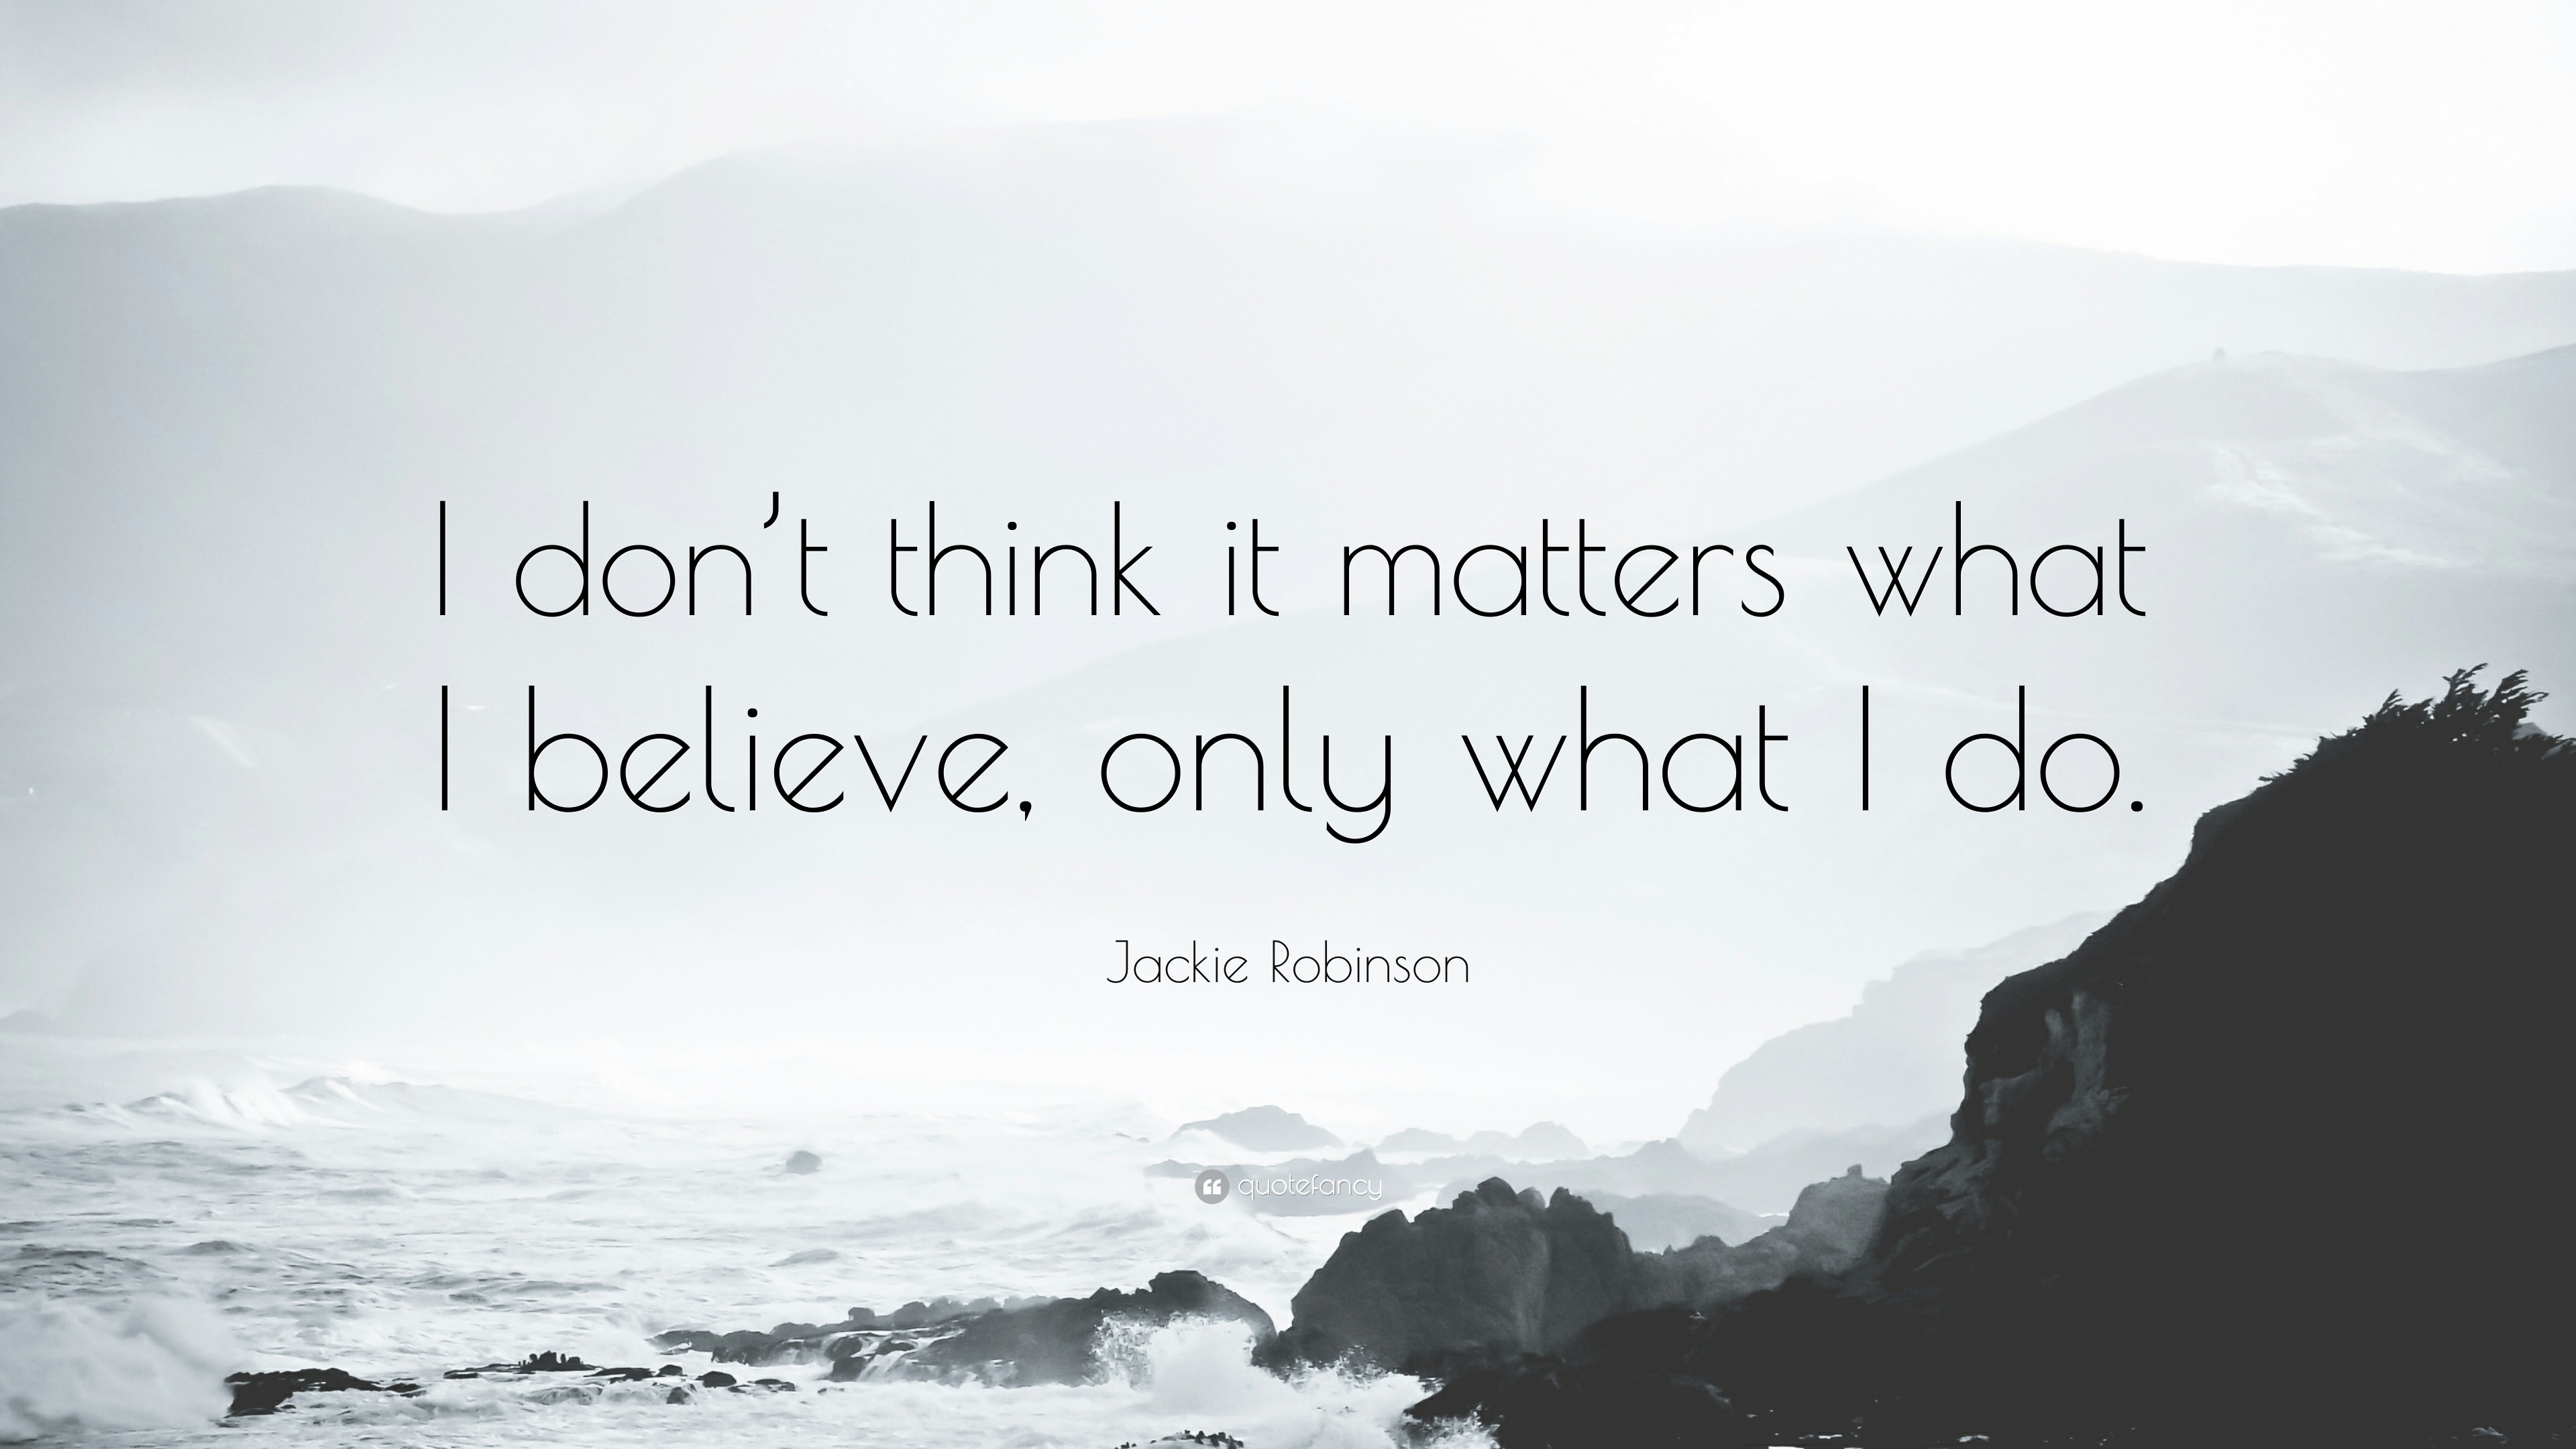 Jackie Robinson Quotes